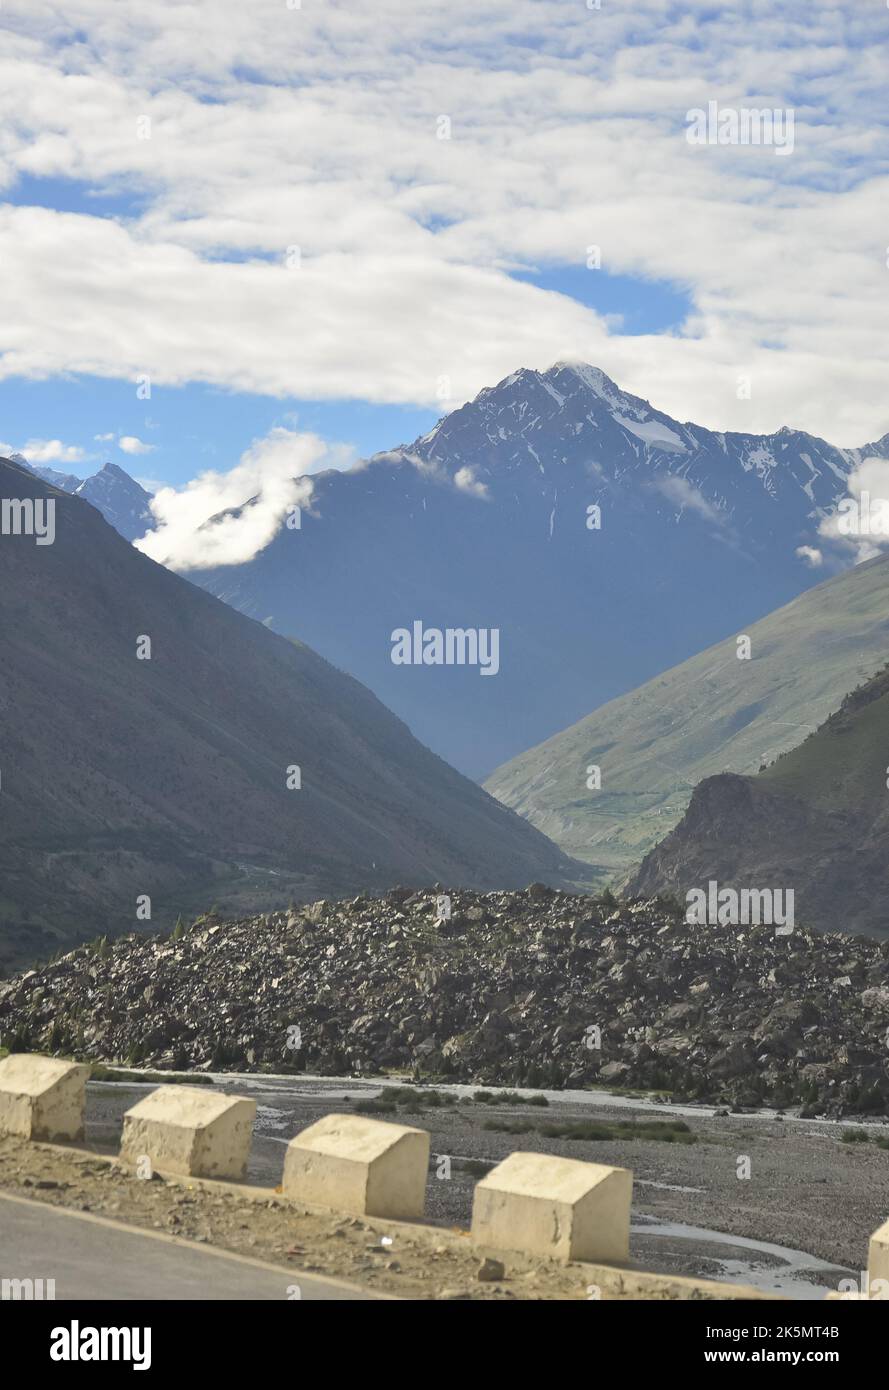 View from road of mountains and clouds with Bhaga river in Darcha, Lahaul and Spiti Stock Photo